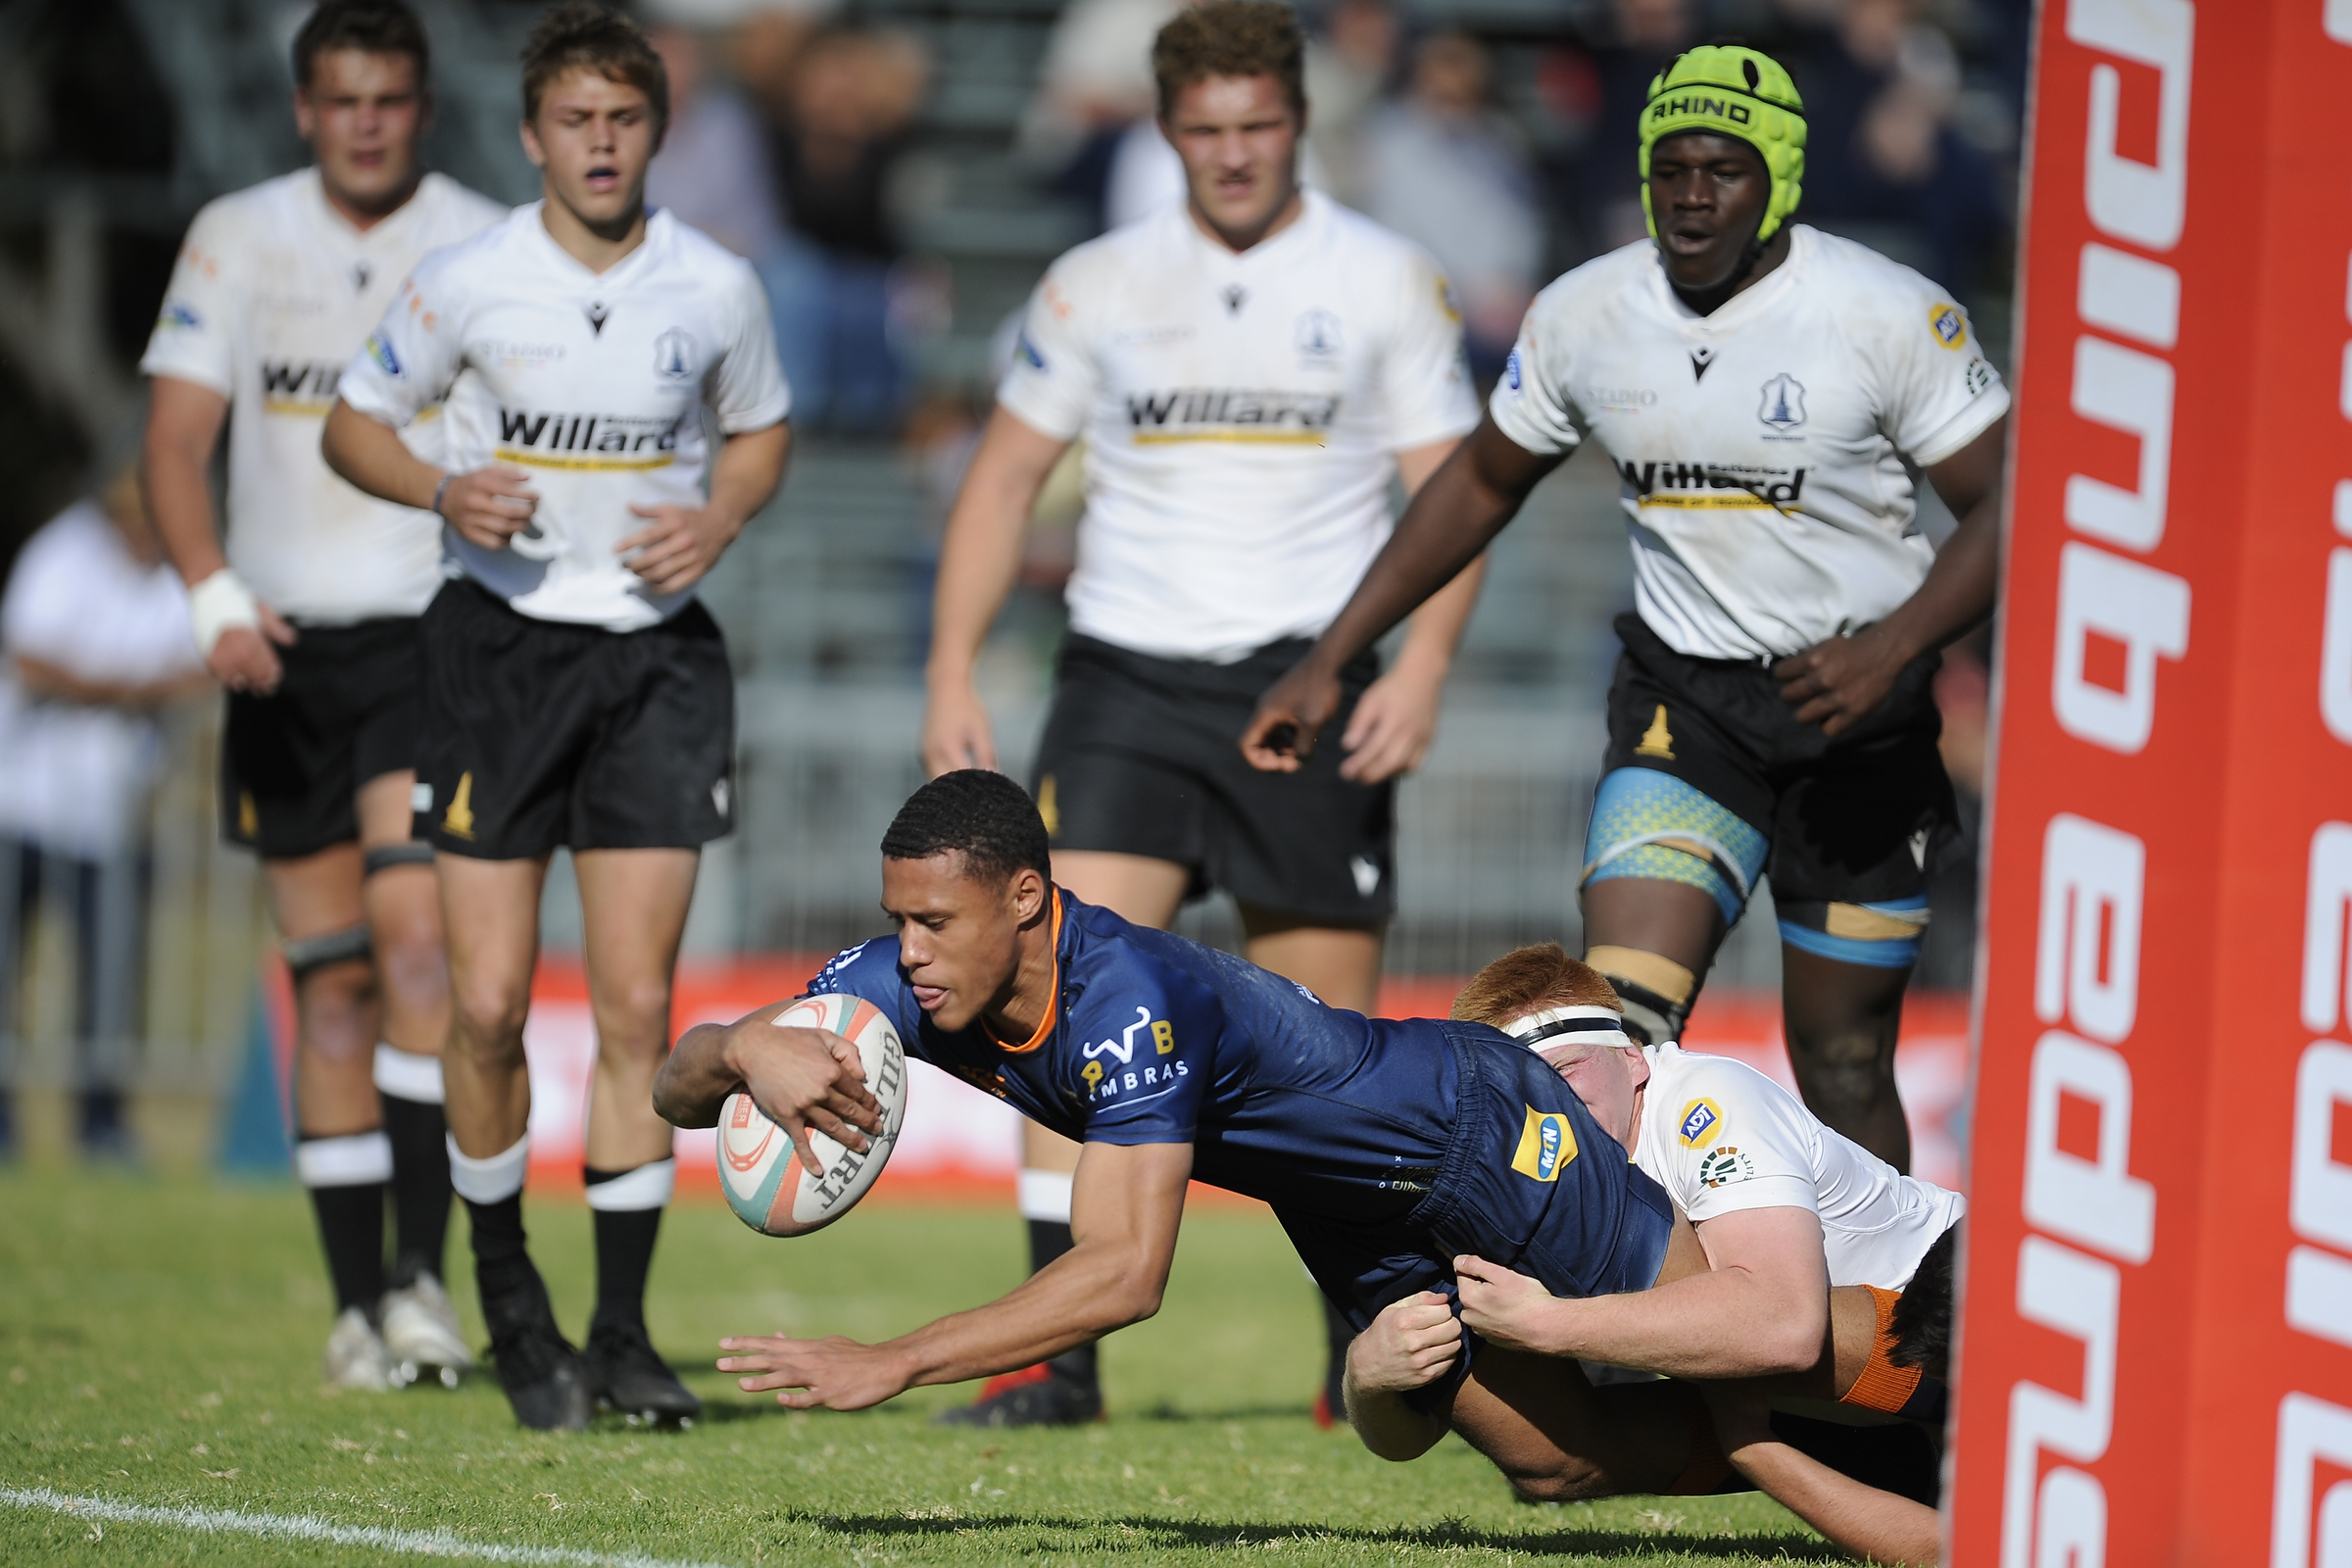 Match report of Grey College 41 vs 17 Hoërskool Monument – 28 May 2022